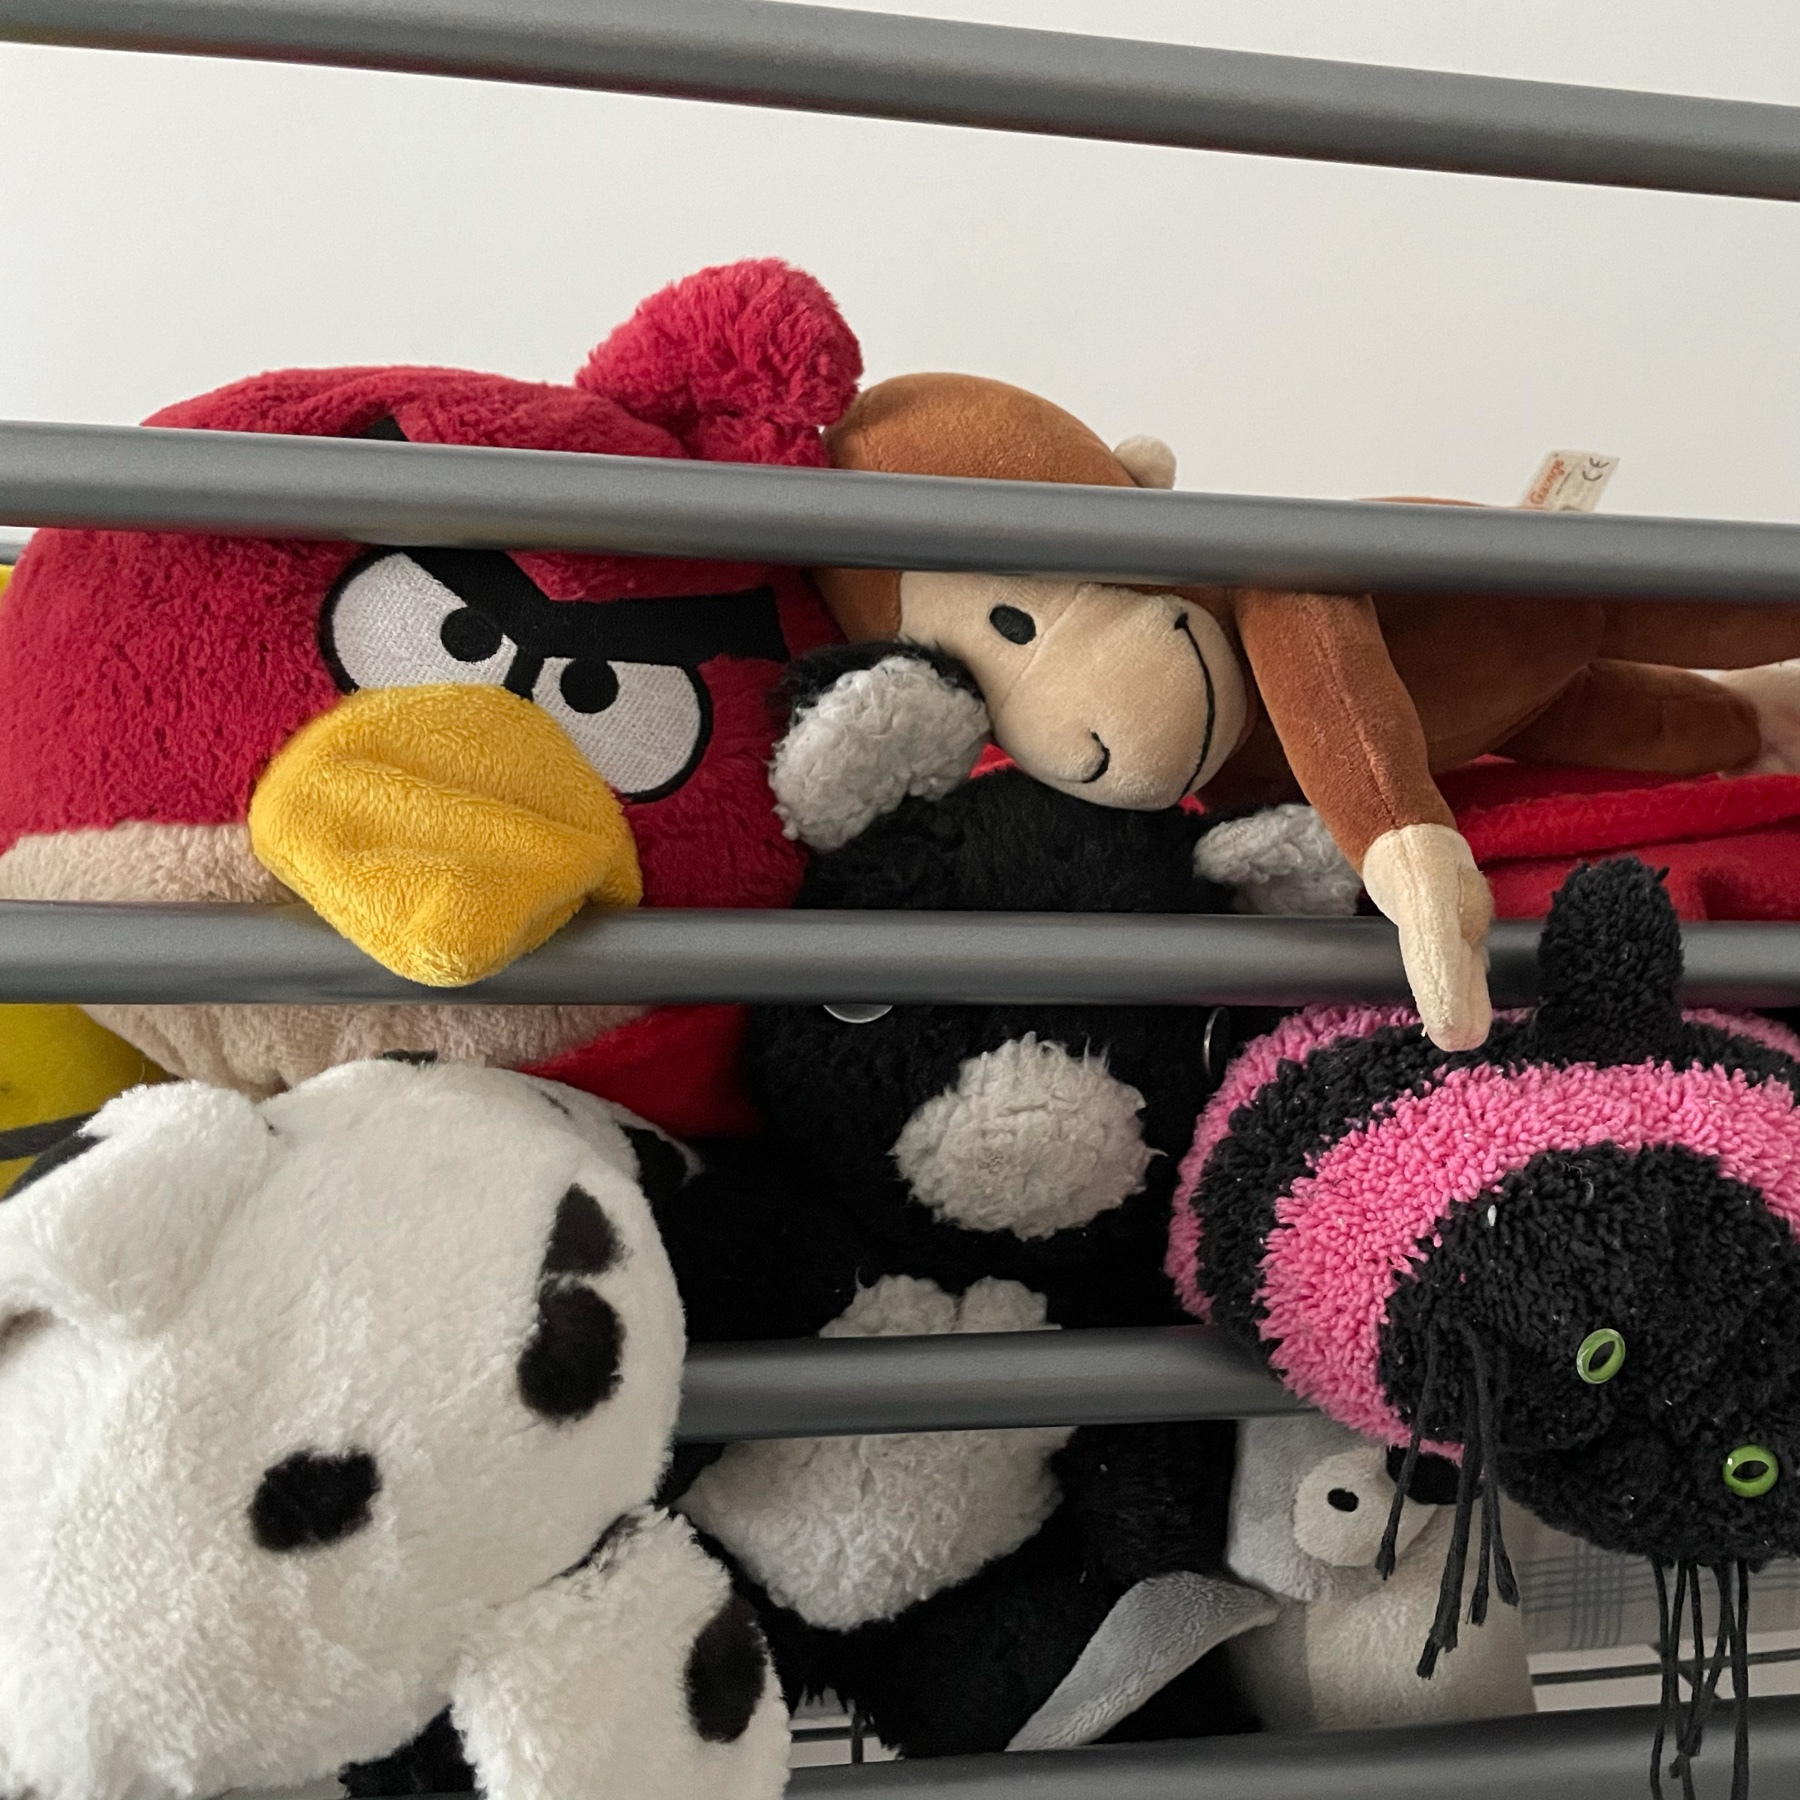 several teddy bears, dogs, monkey on a top bunk of a bunk bed